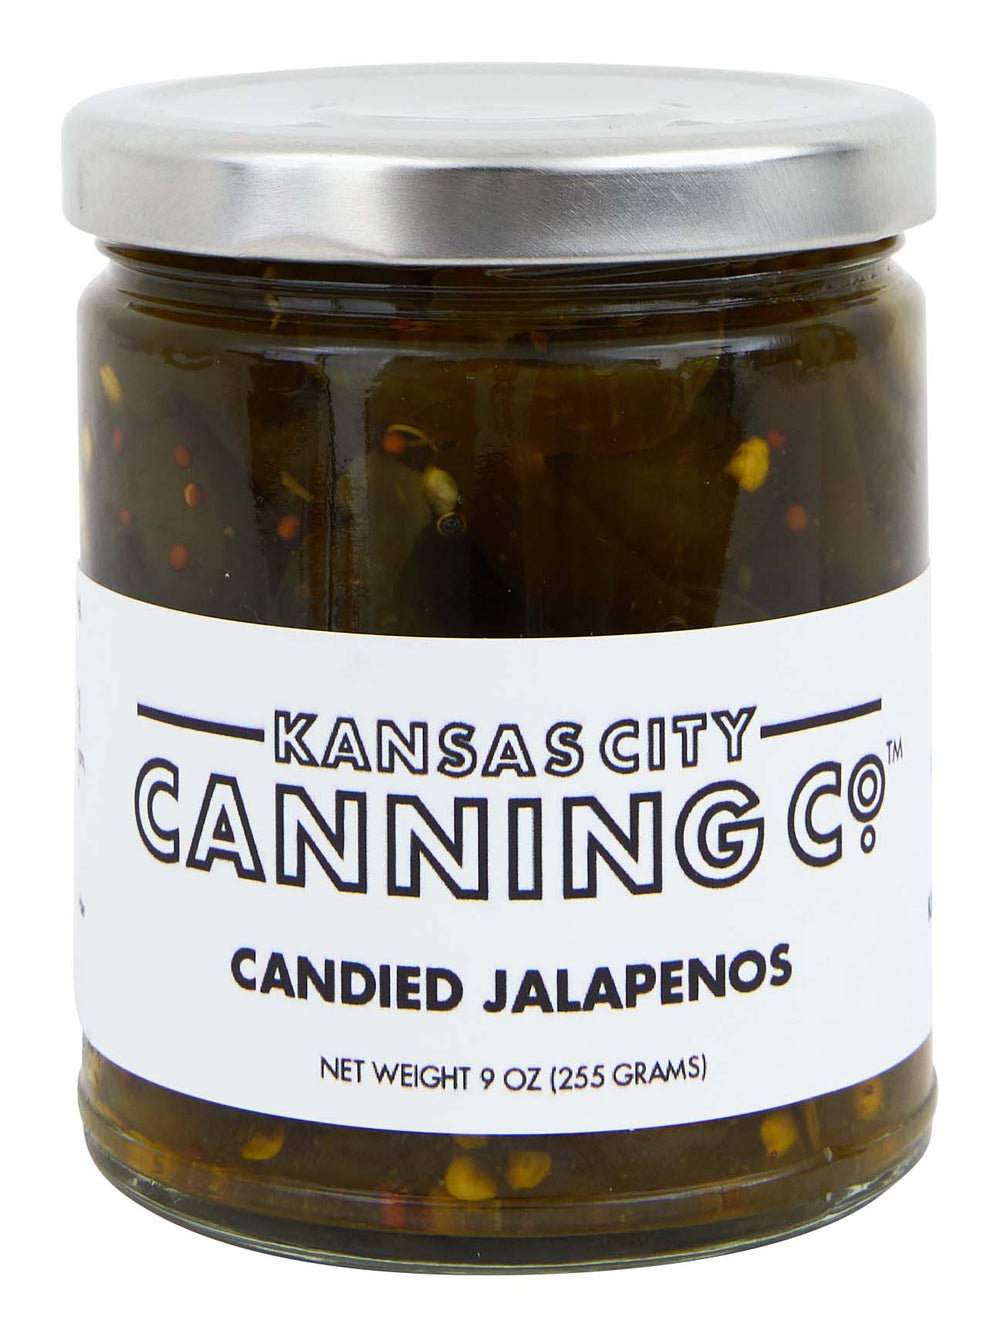 Kansas City Canning Co. Collection